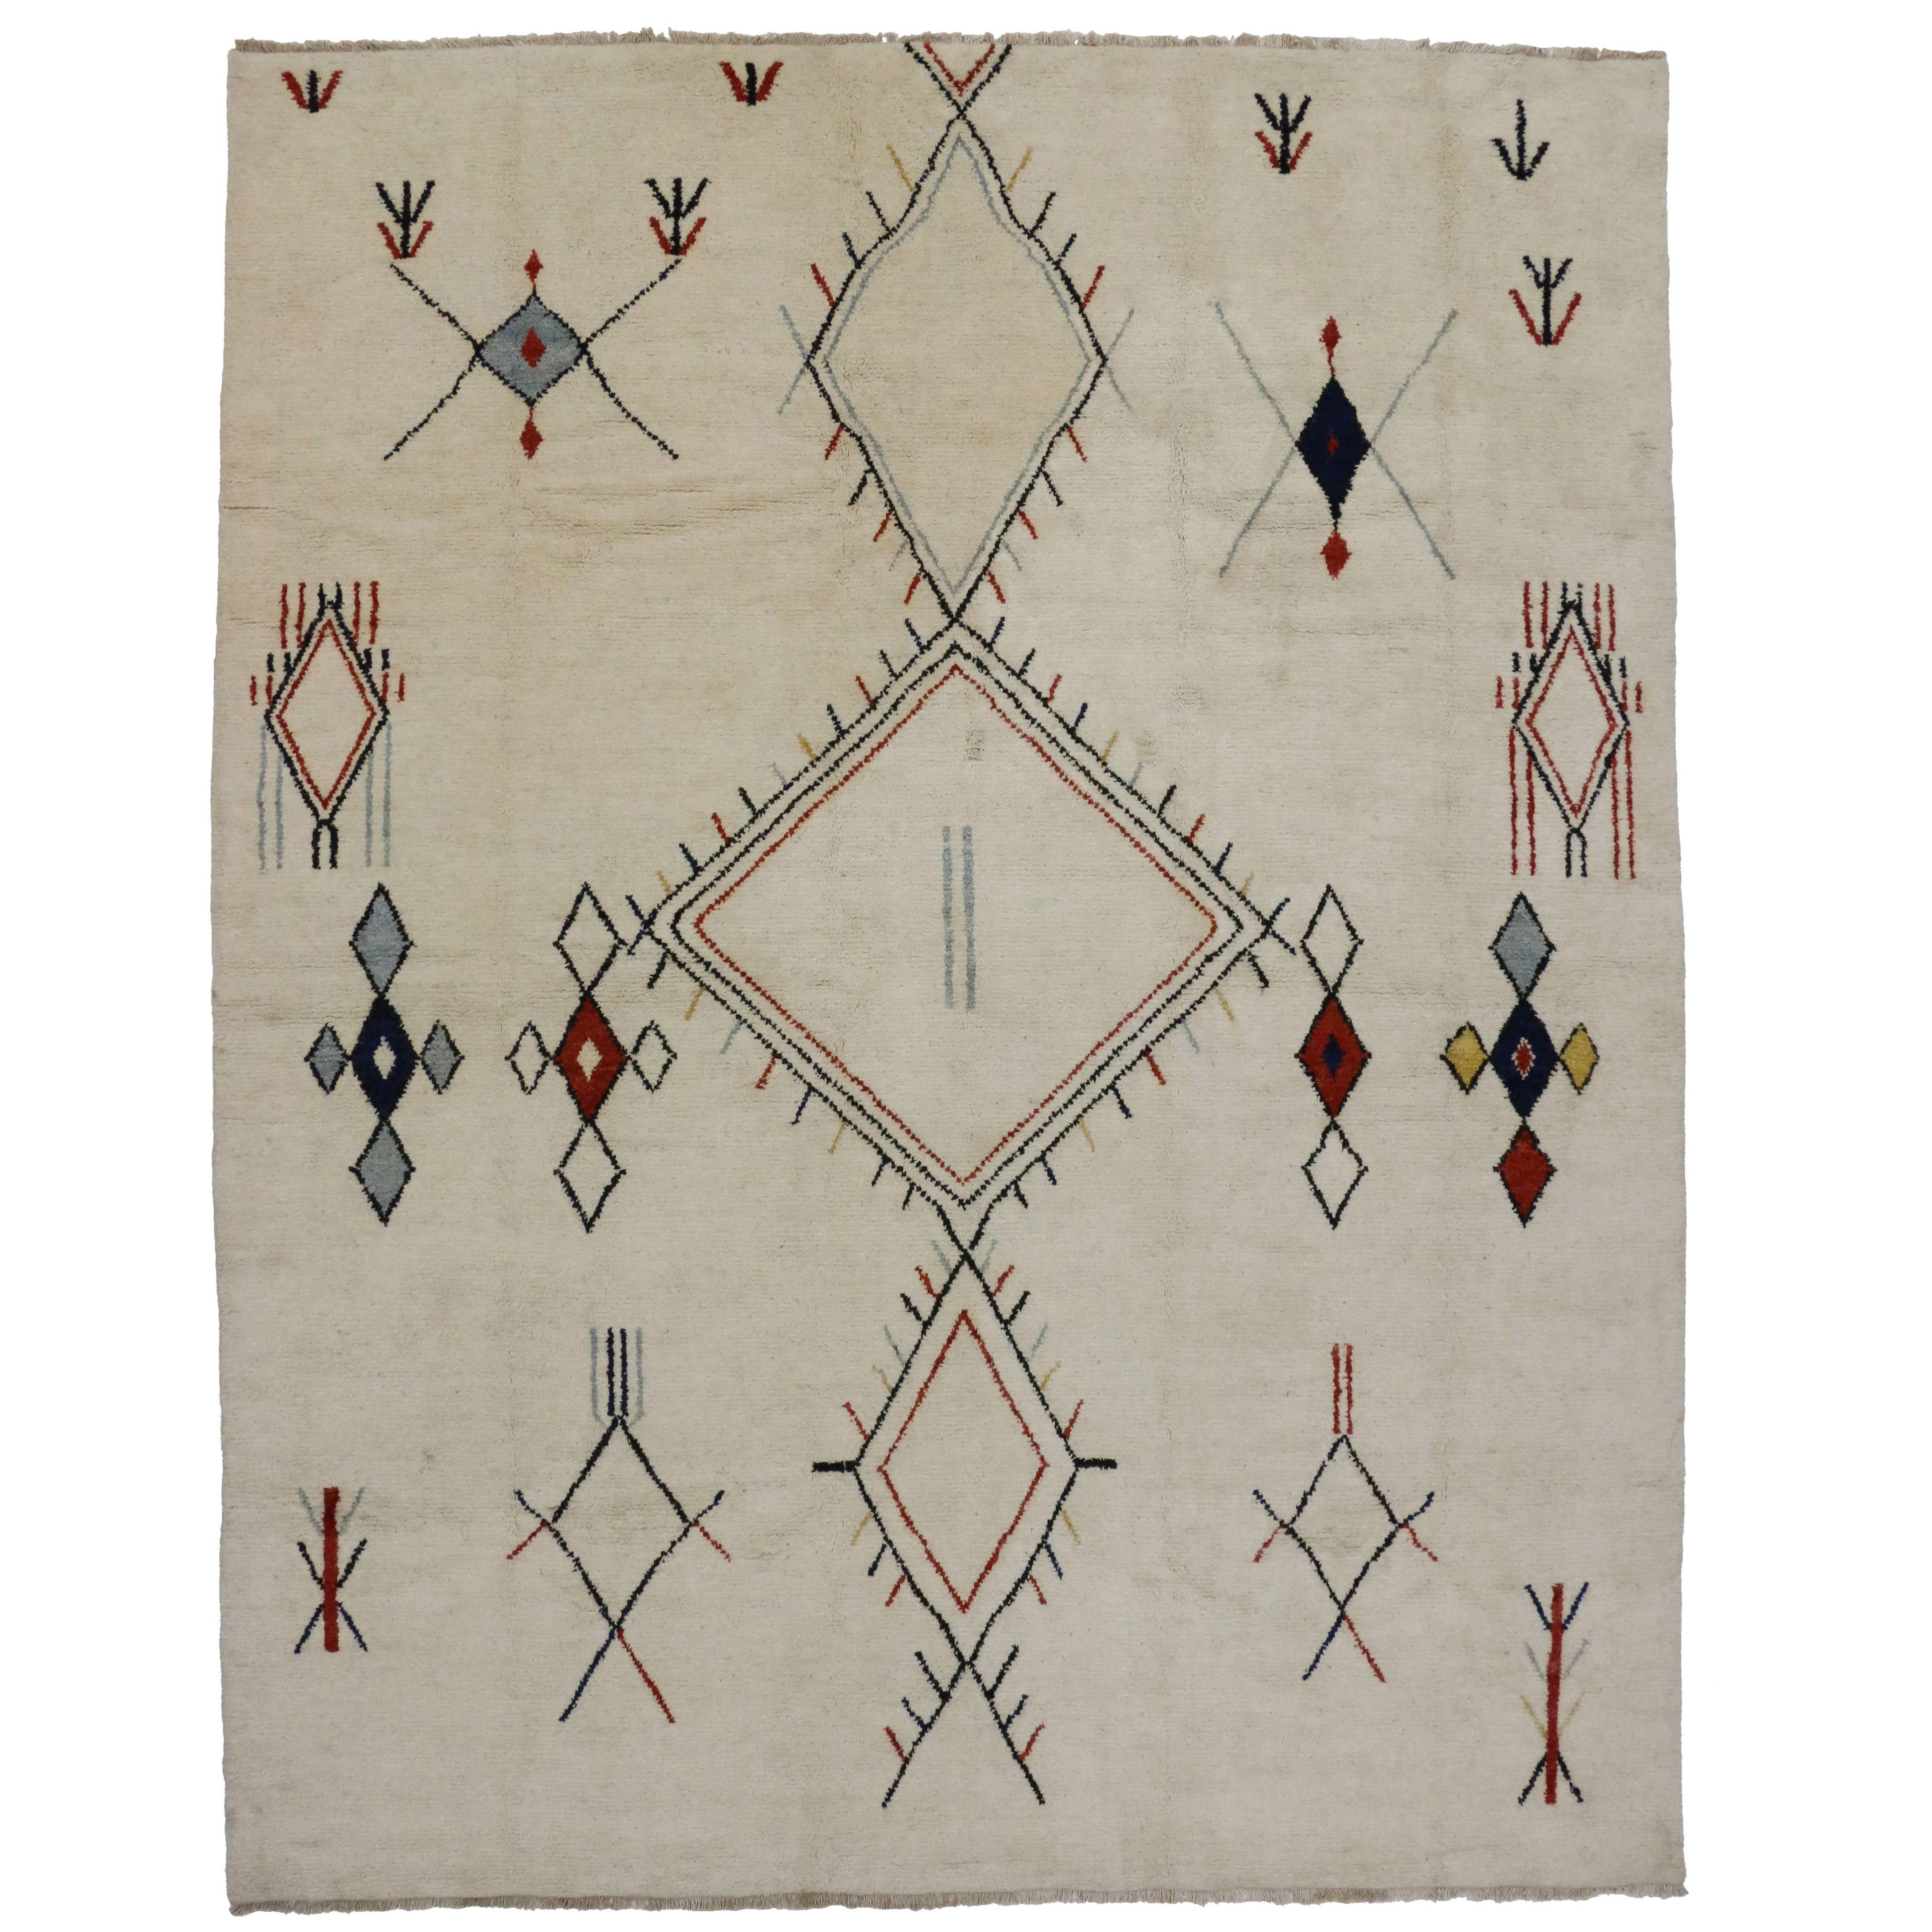 Contemporary Moroccan Style Area Rug with Nomadic Tribal Design and Hygge Vibes